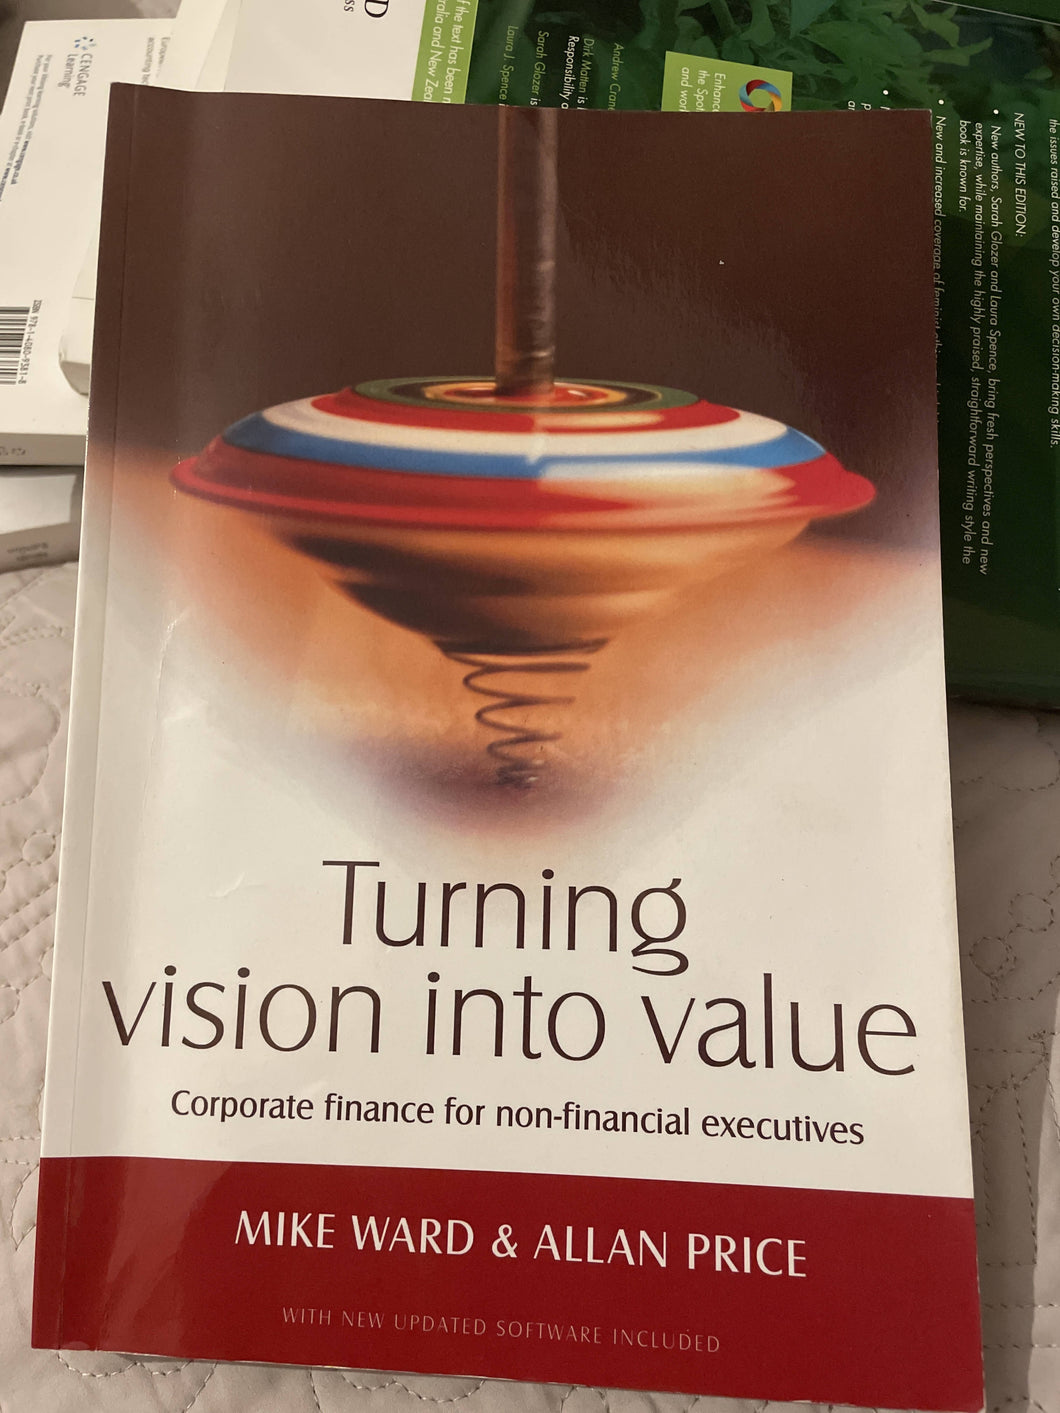 Turning vision into value: corporate finance for non-financial executives